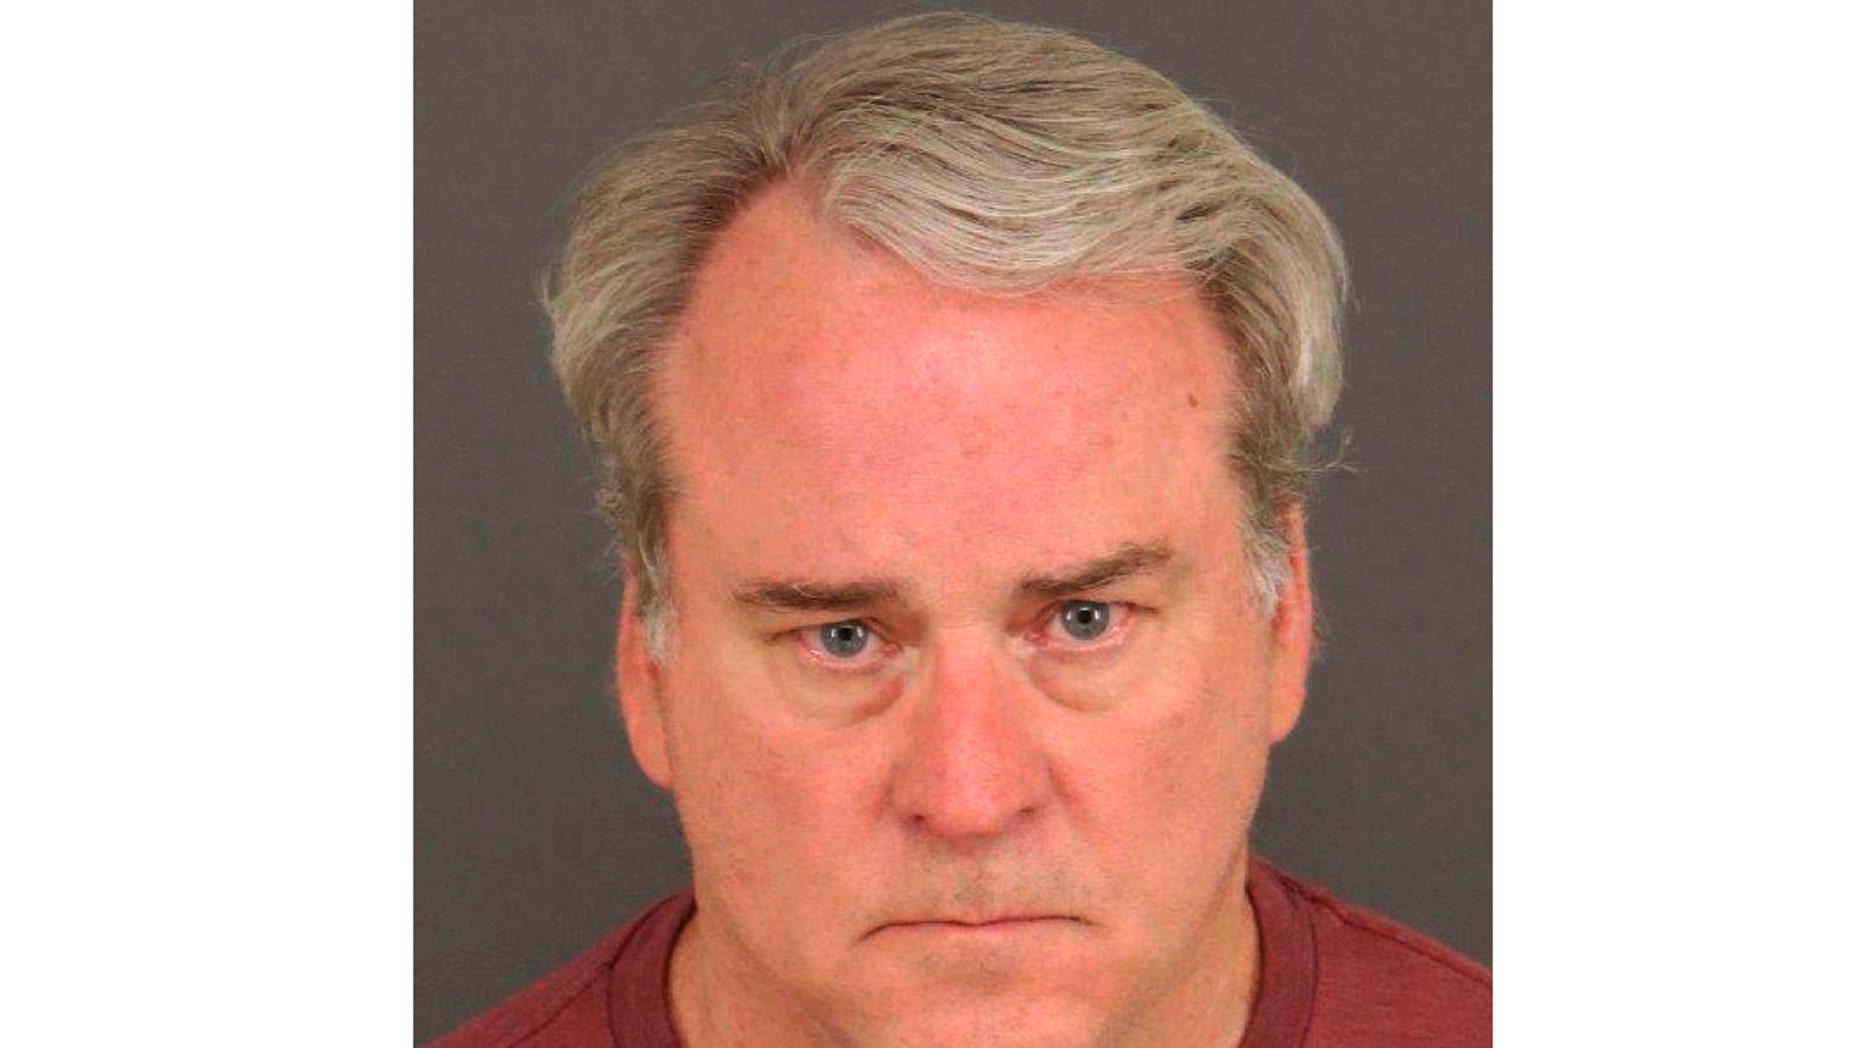 This undated photo provided by the Colorado Springs Police Service shows Michael Whyte, 58, of Thornton, Colo., Who was arrested on Thursday, June 13, 2019 for first degree murder. Police say that genetic evidence led them to identify Whyte as a suspect in the 1987 strangulation death of Darlene Krashoc, a 20-year-old soldier in Fort Carson, Colorado (Colorado Springs Police Department via AP).